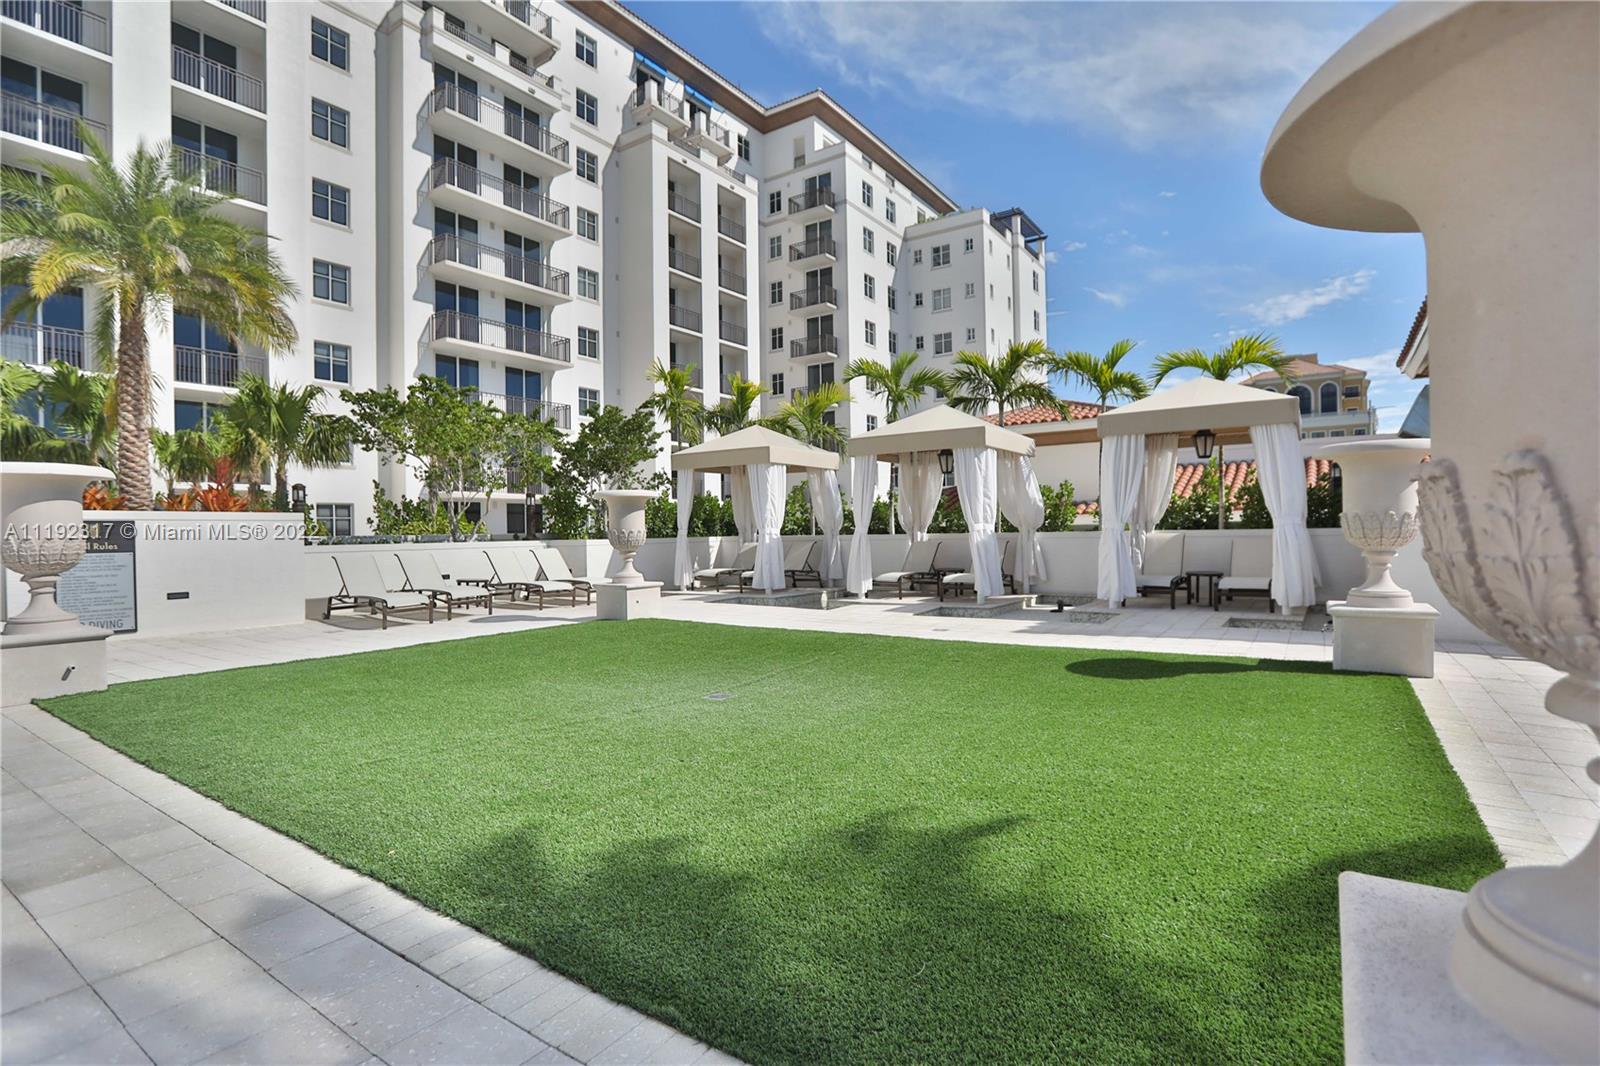 Sofia in Coral Gables boasts a carefully curated collection of luxury amenities, including a full-size fitness center, a large outdoor elevated pool, and social lounges overlooking the Coral Gables skyline. Each thoughtfully designed home at Sofia—whether it’s a studio or a penthouse suite—was built with state-of-the-art amenities and high-end finishes fit for a world-class resort. At Sofia, interior spaces flow naturally into exterior spaces, so you can enjoy the tropical breeze and stunning views of beautiful Coral Gables while sitting in the comfort of your own home.